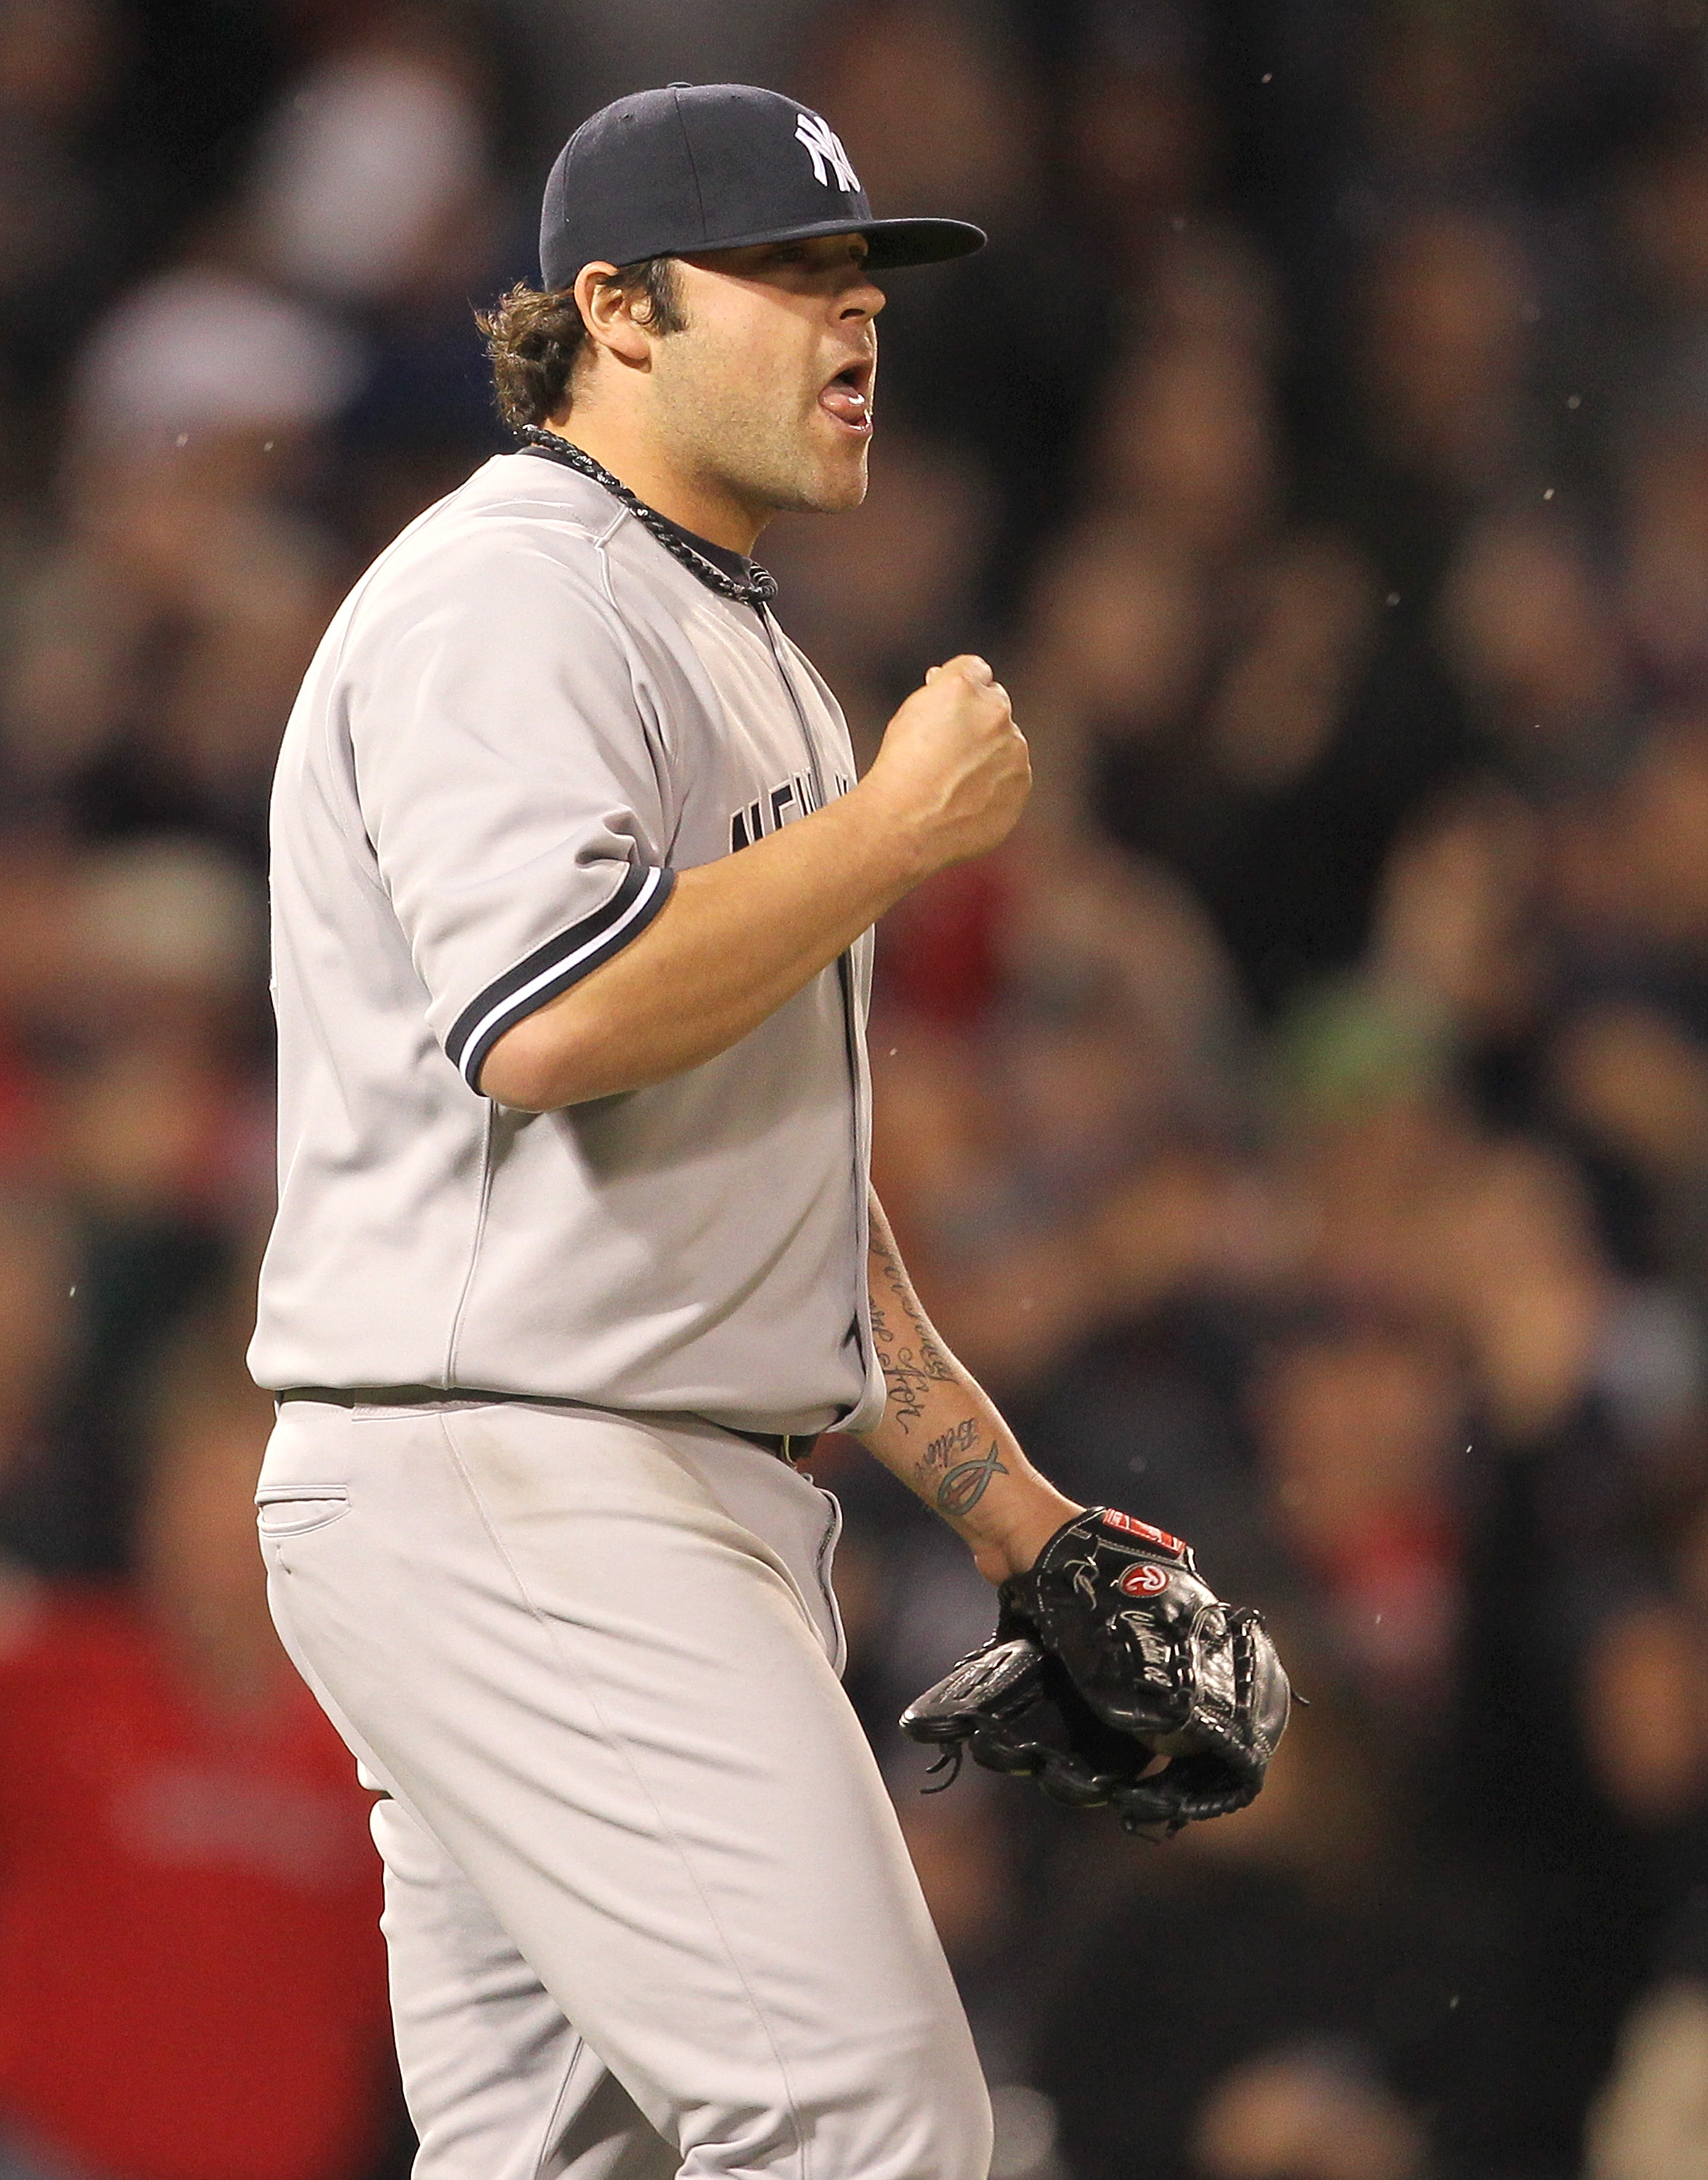 BOSTON, MA - APRIL 10:  Joba Chamberlain #62 of the New York Yankees reacts after giving up two runs against the Boston Red Sox at Fenway Park April 10, 2011 in Boston, Massachusetts. (Photo by Jim Rogash/Getty Images)